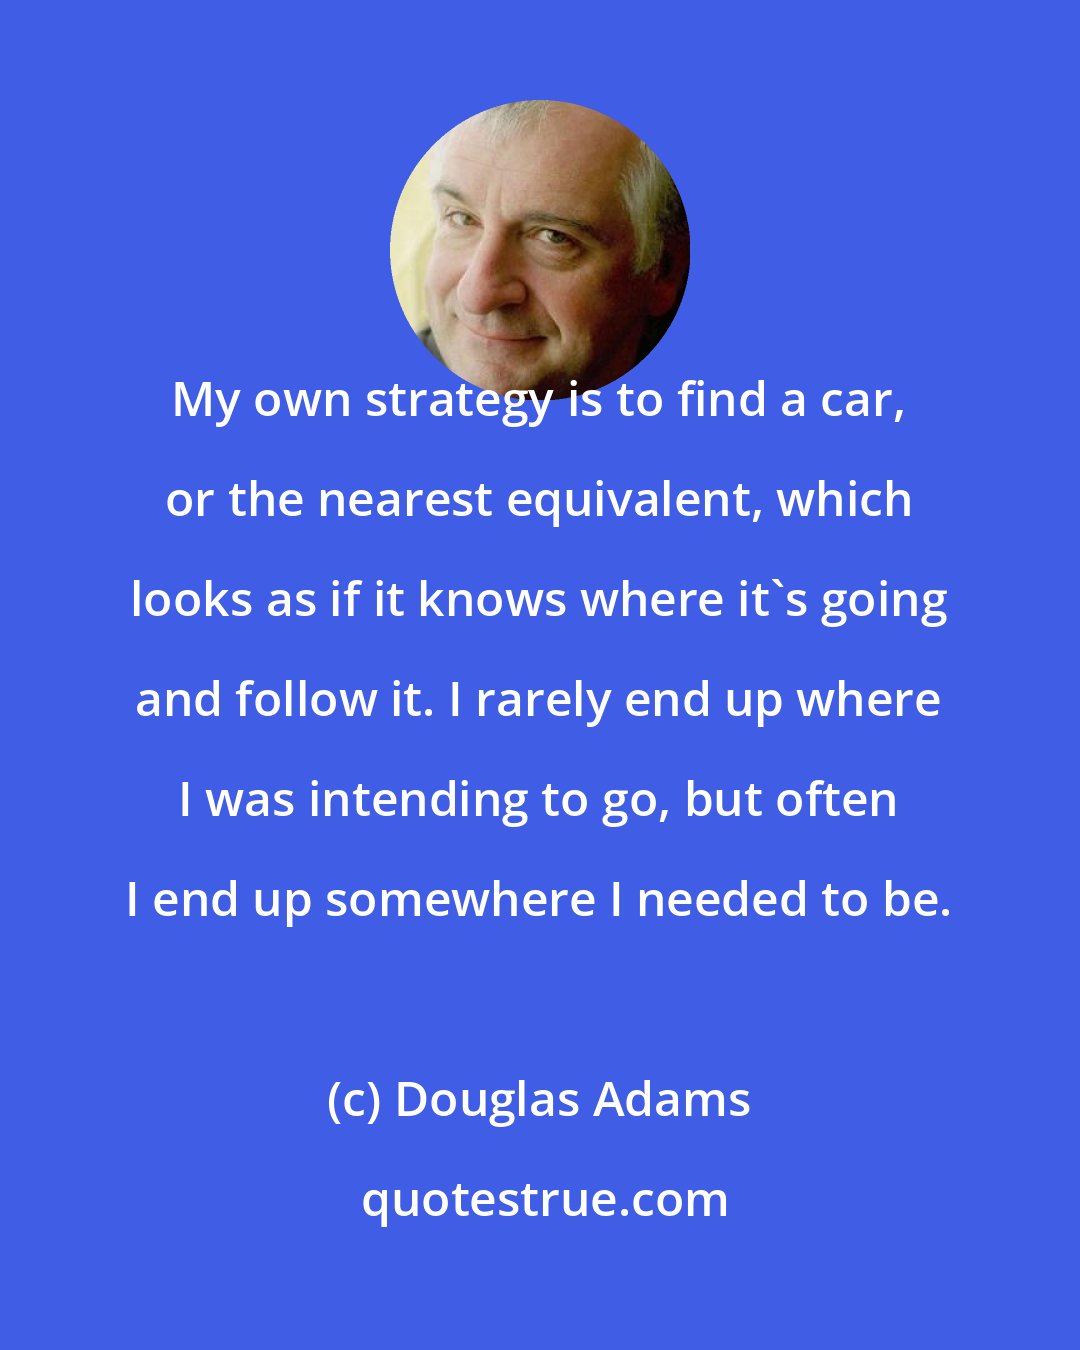 Douglas Adams: My own strategy is to find a car, or the nearest equivalent, which looks as if it knows where it's going and follow it. I rarely end up where I was intending to go, but often I end up somewhere I needed to be.